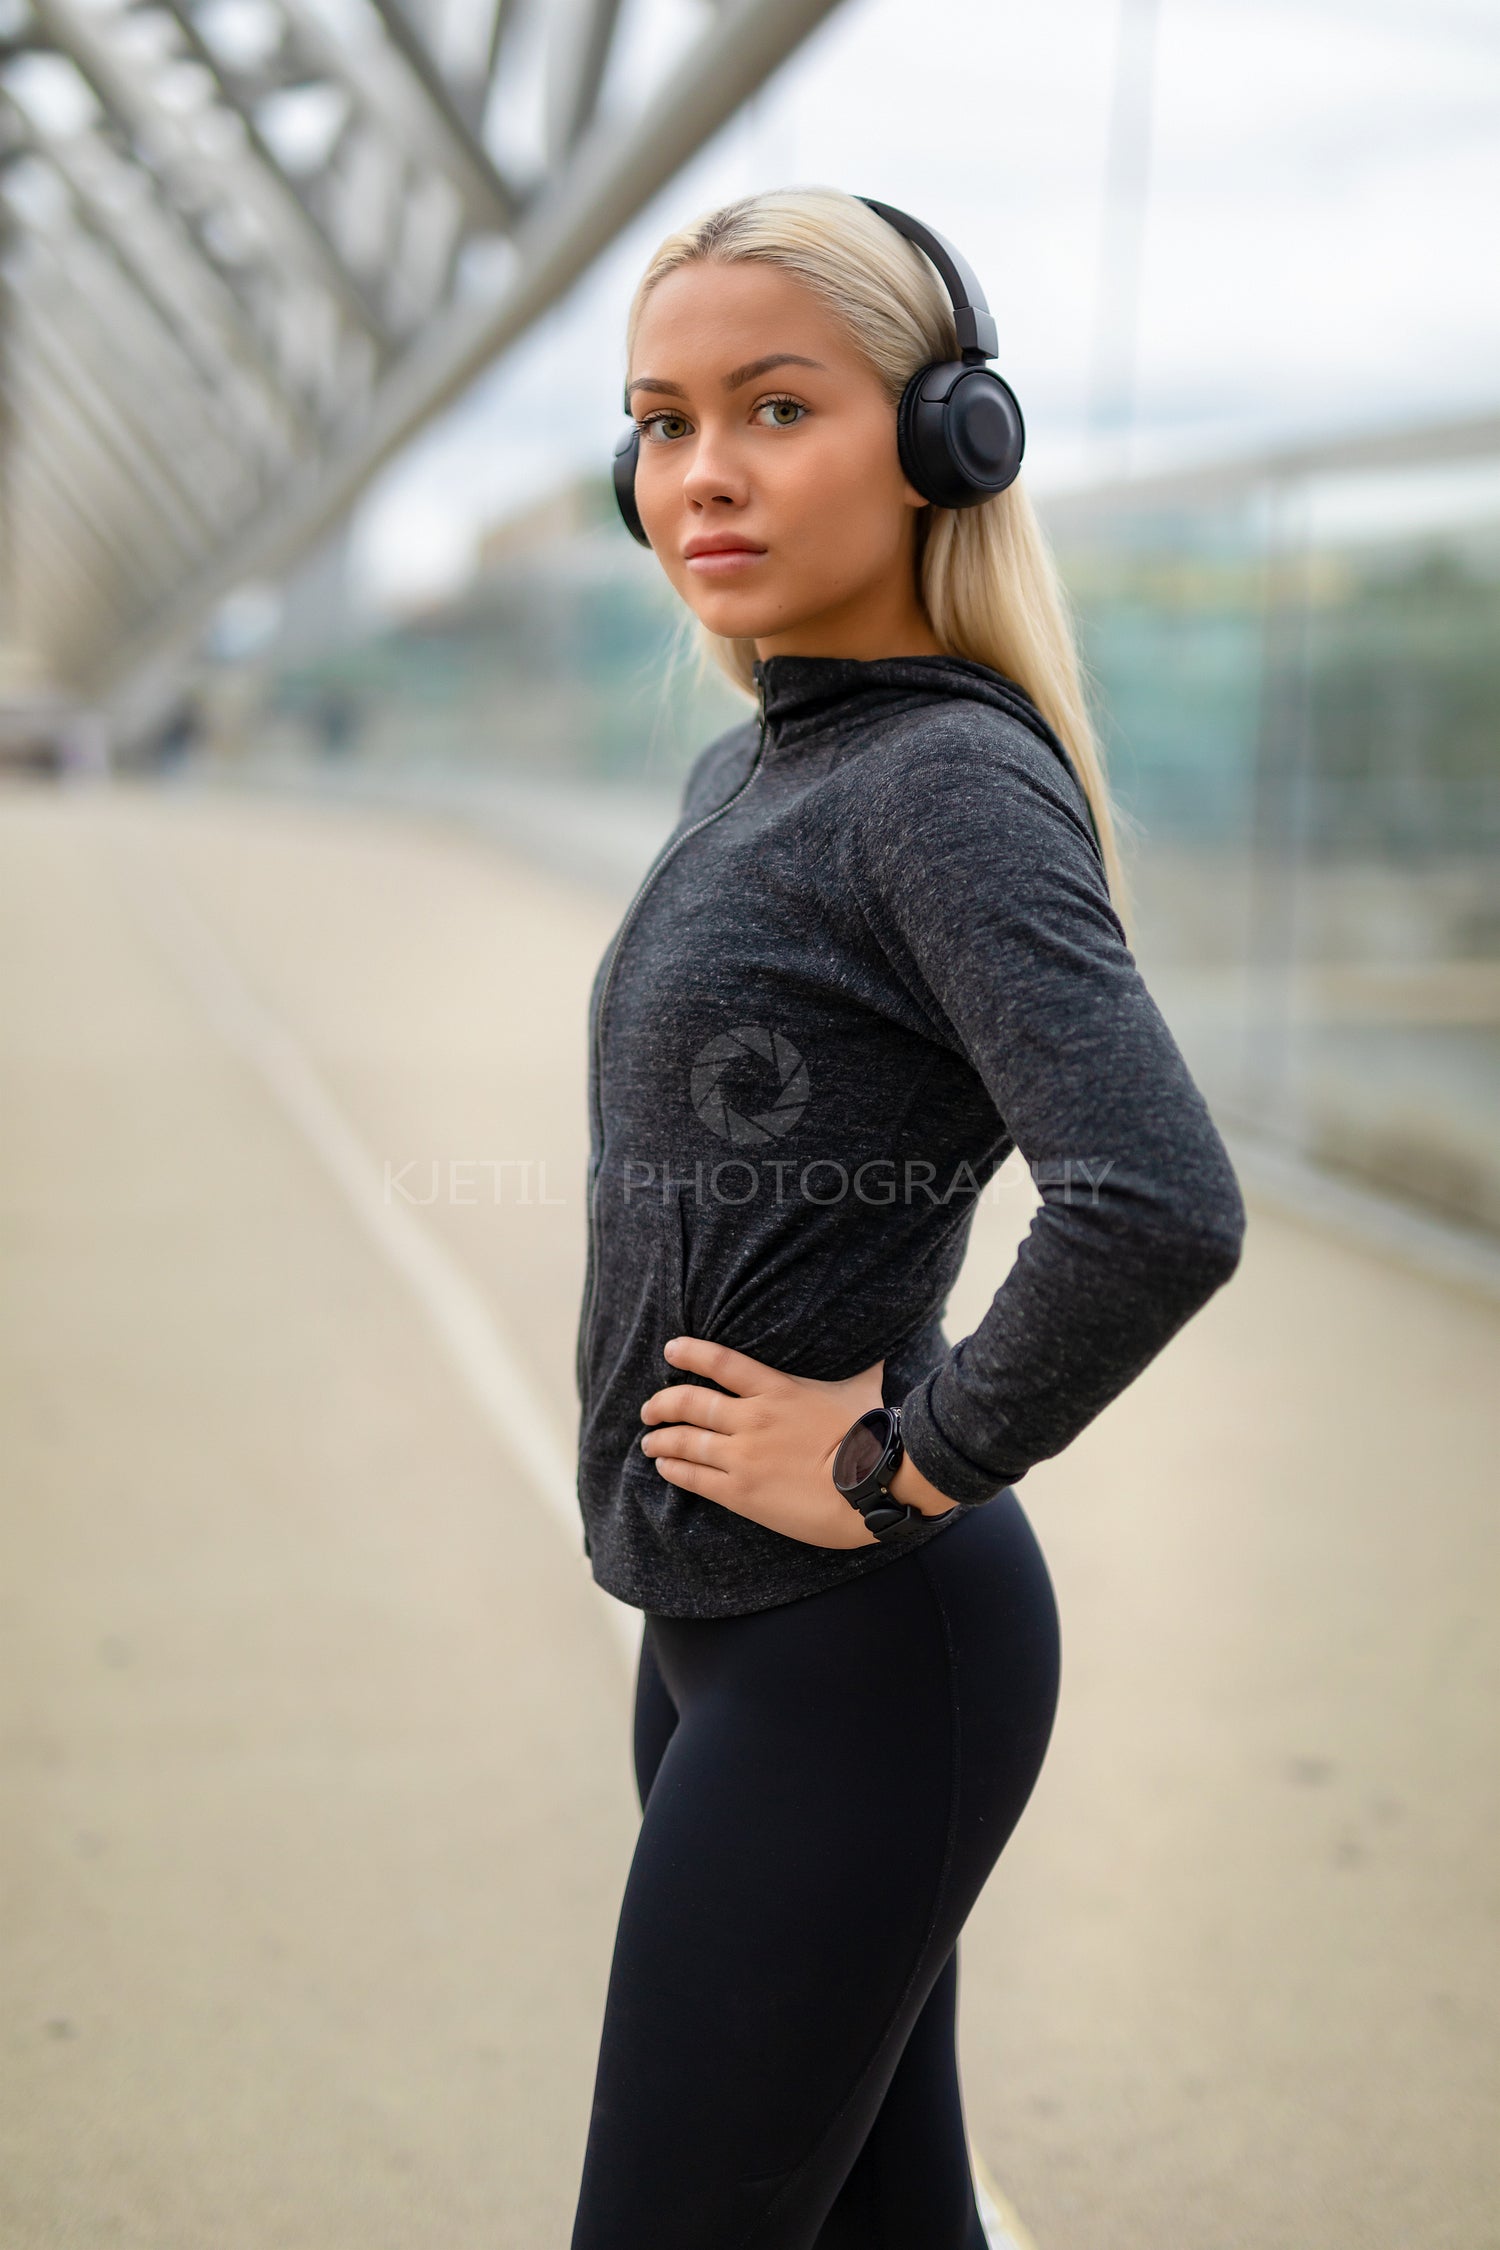 Close-up of Woman in Black Workout Outfit Listen To Music on Headphones